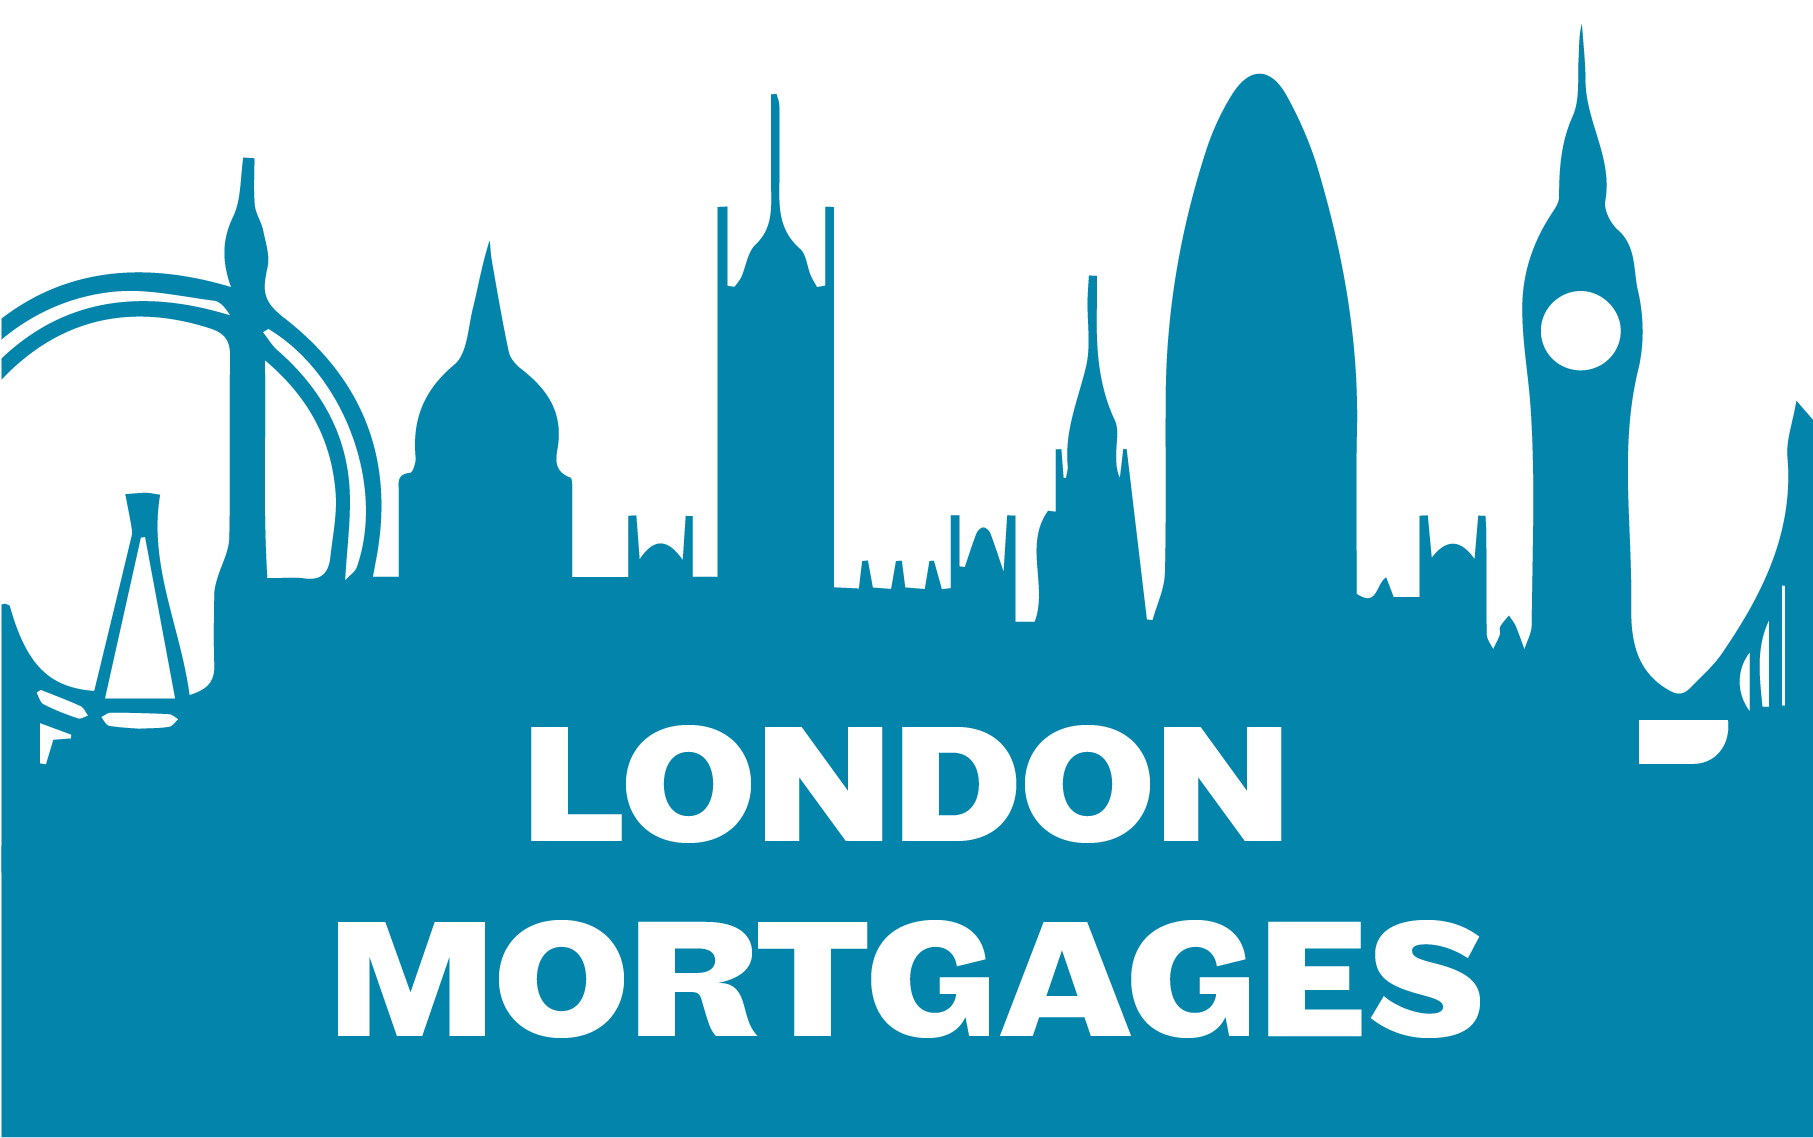 London Mortgages